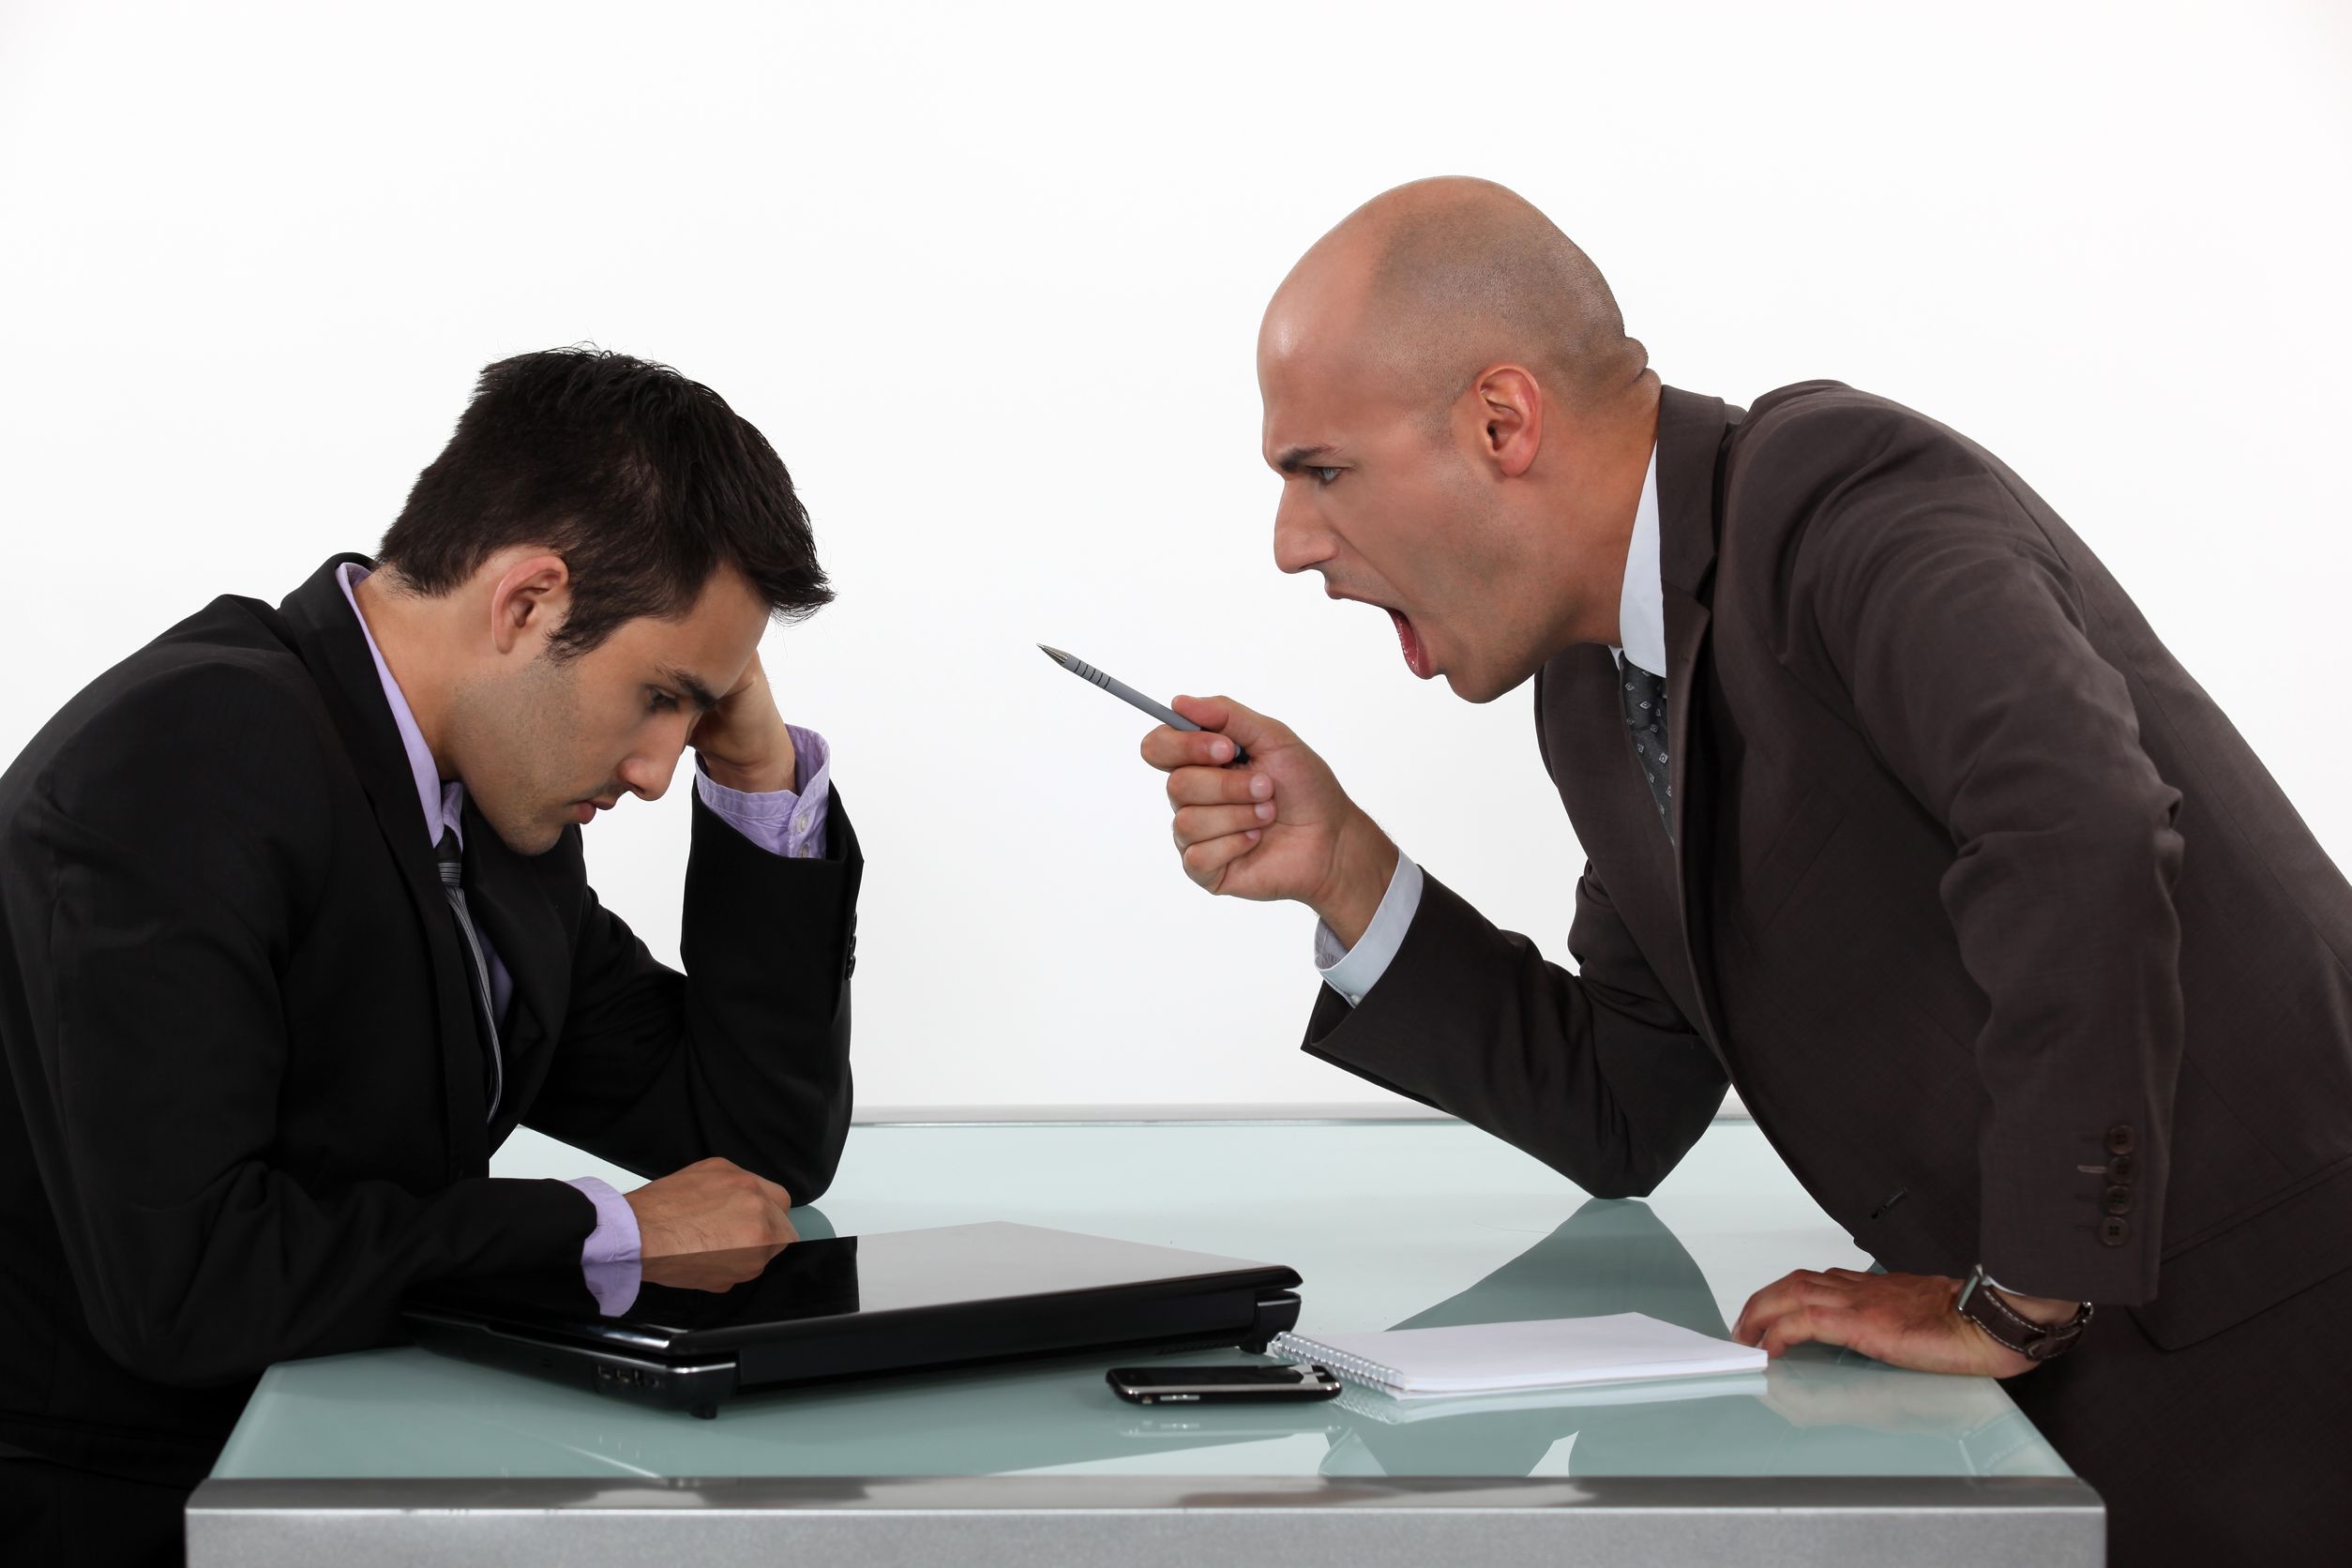 Conflict In The Workplace - Career Intelligence